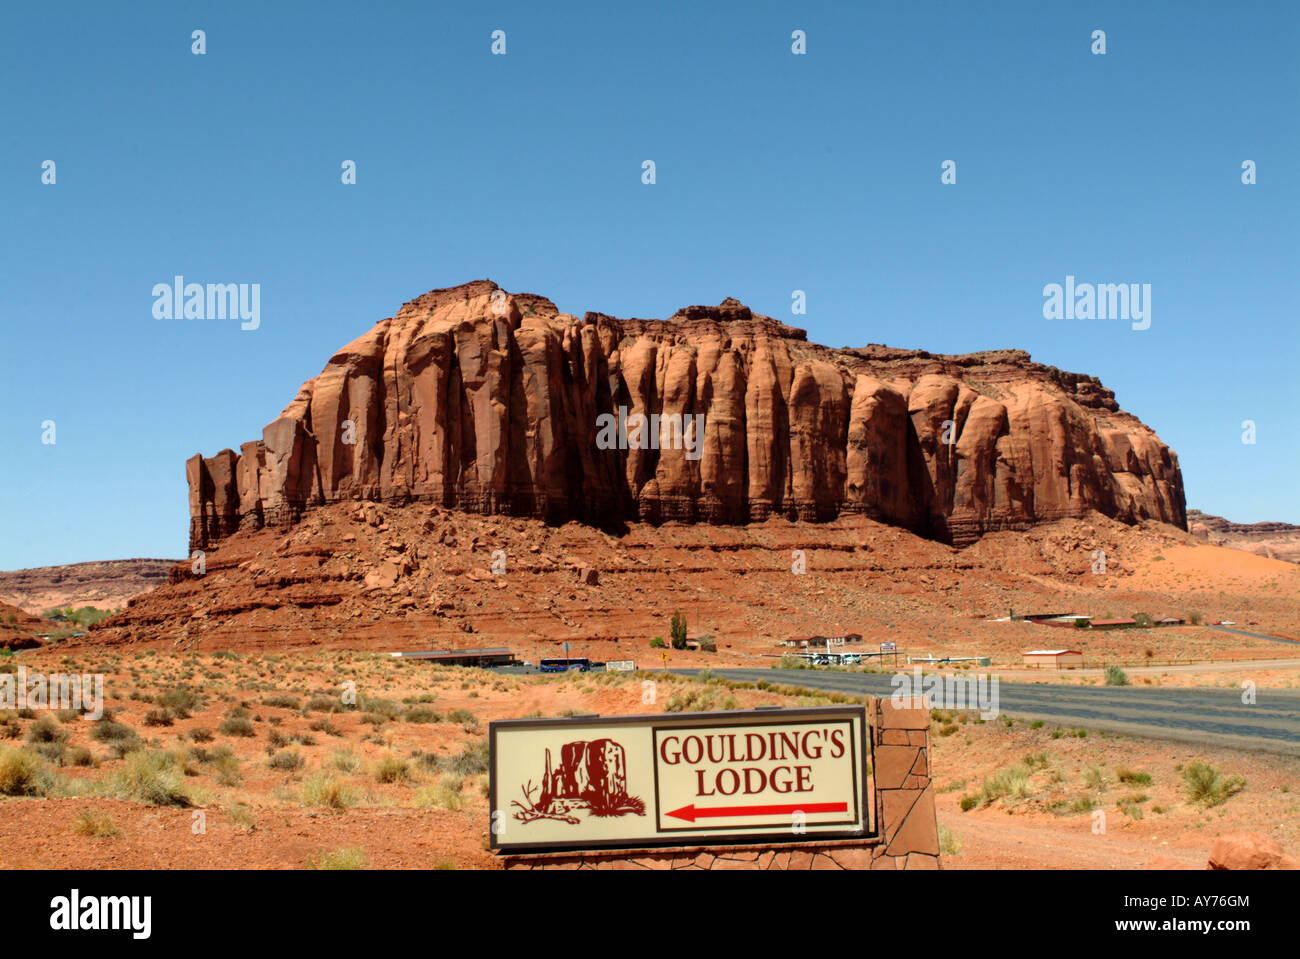 Near Gouldings Lodge Monument Valley Stock Photo: 17015011 - Alamy